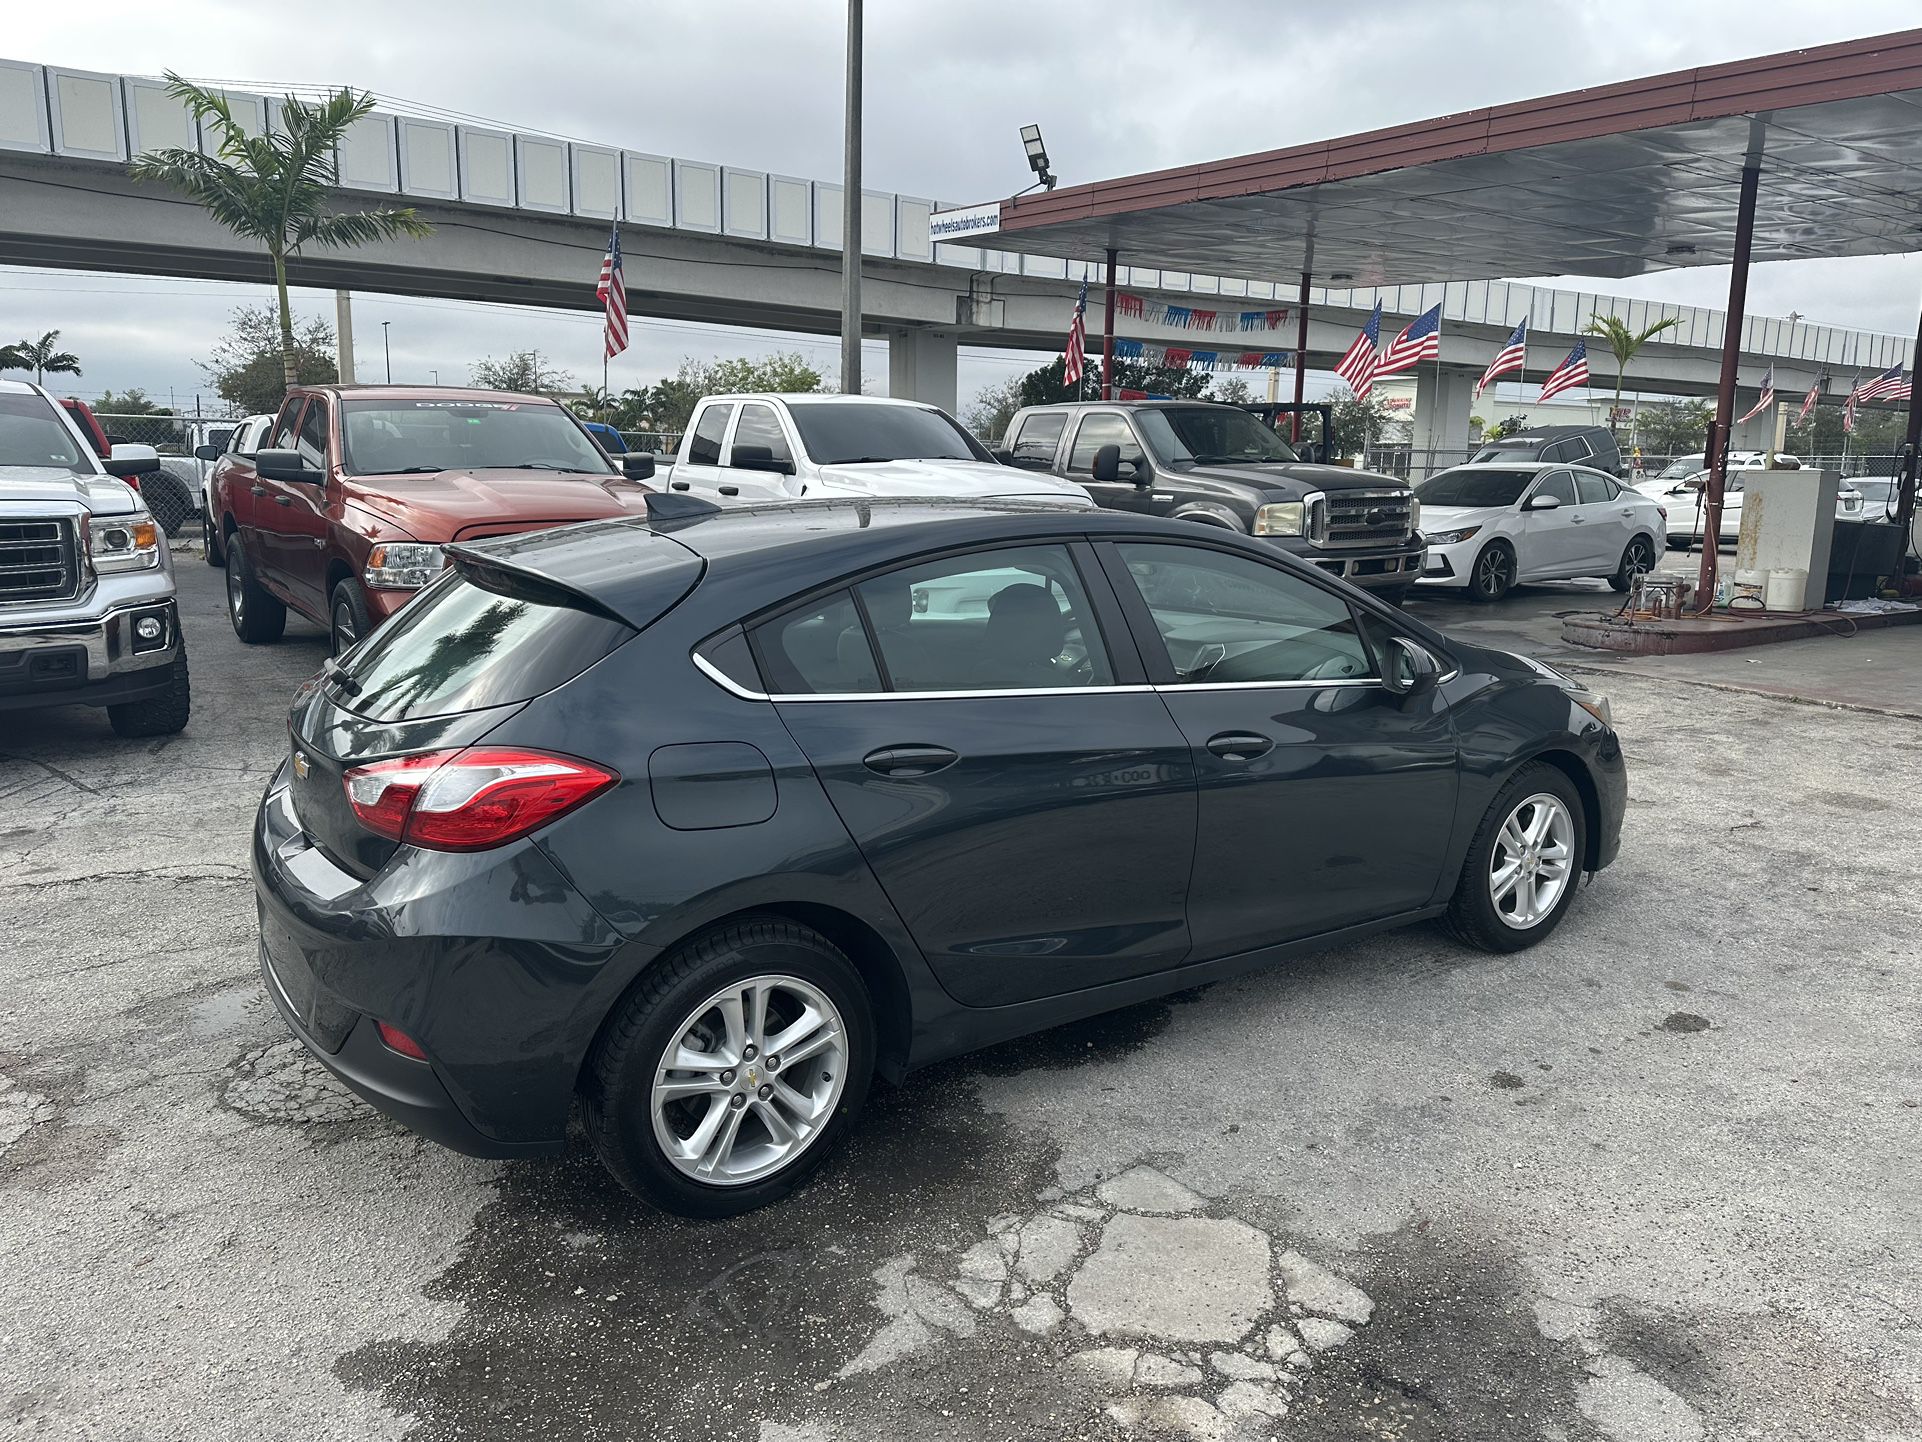 used 2018 chevrolet cruze - back view